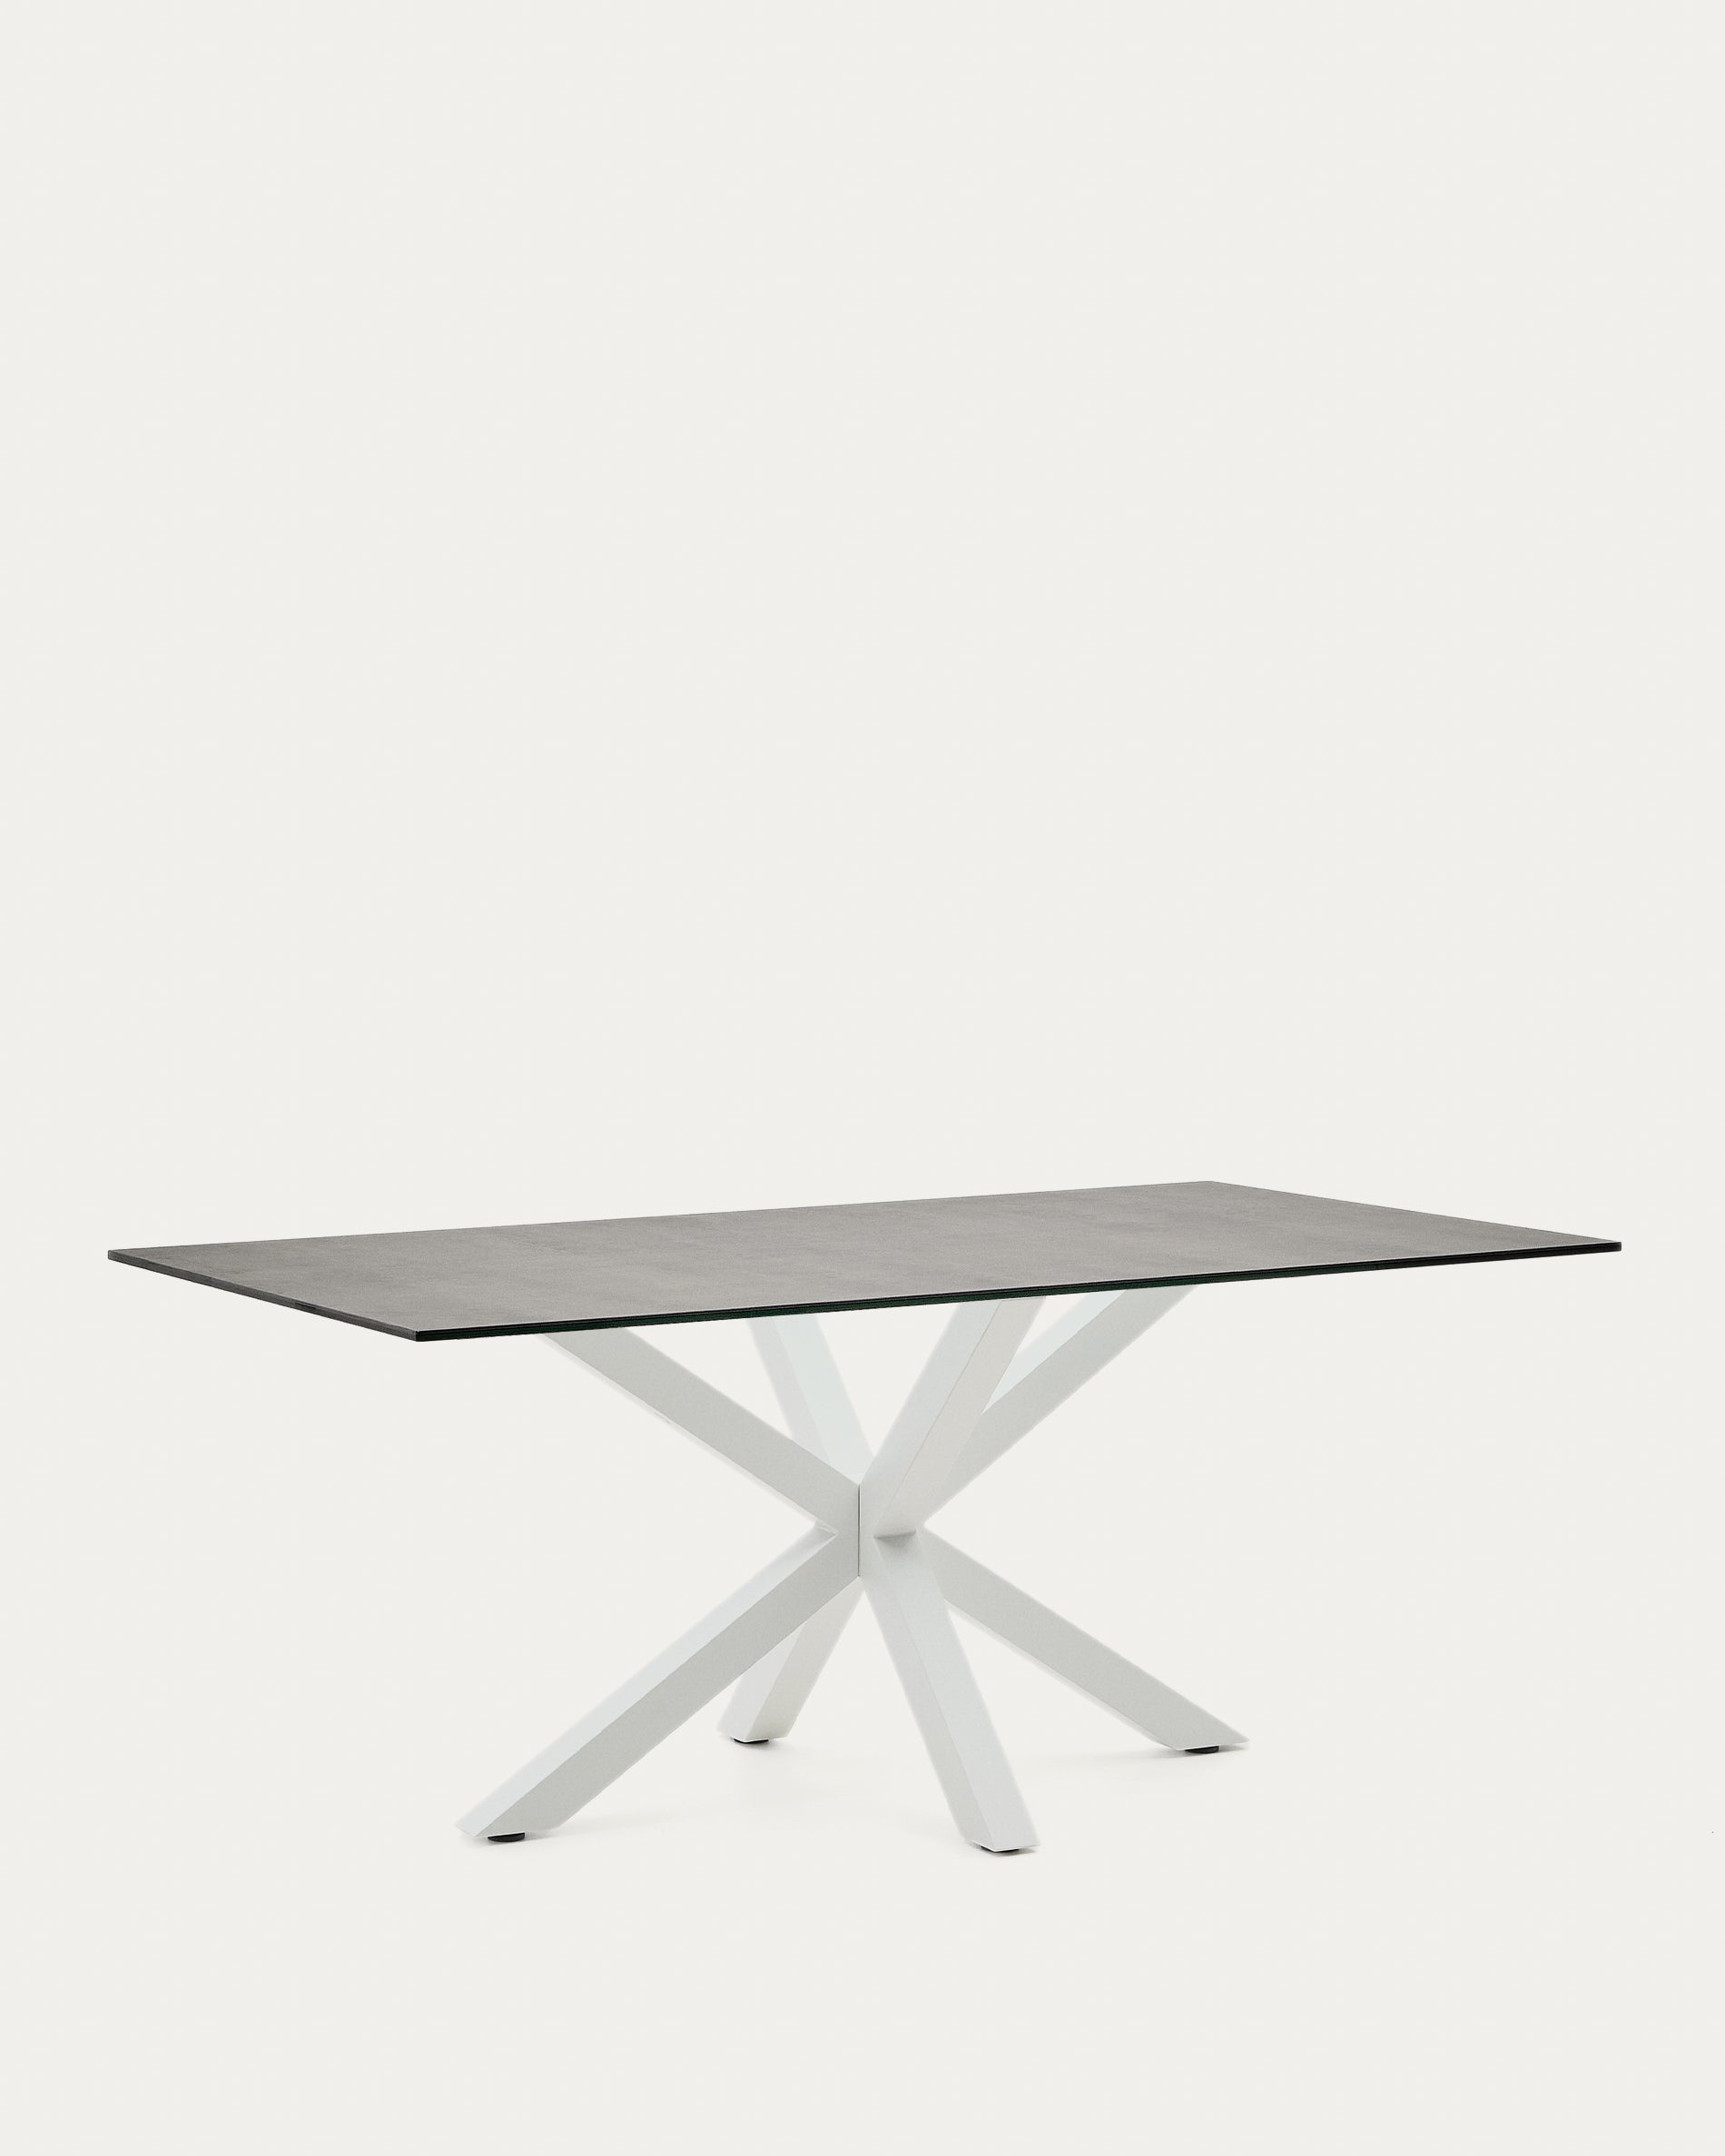 Argo table Iron Moss porcelain and steel legs with white finish, 180 x 100 cm